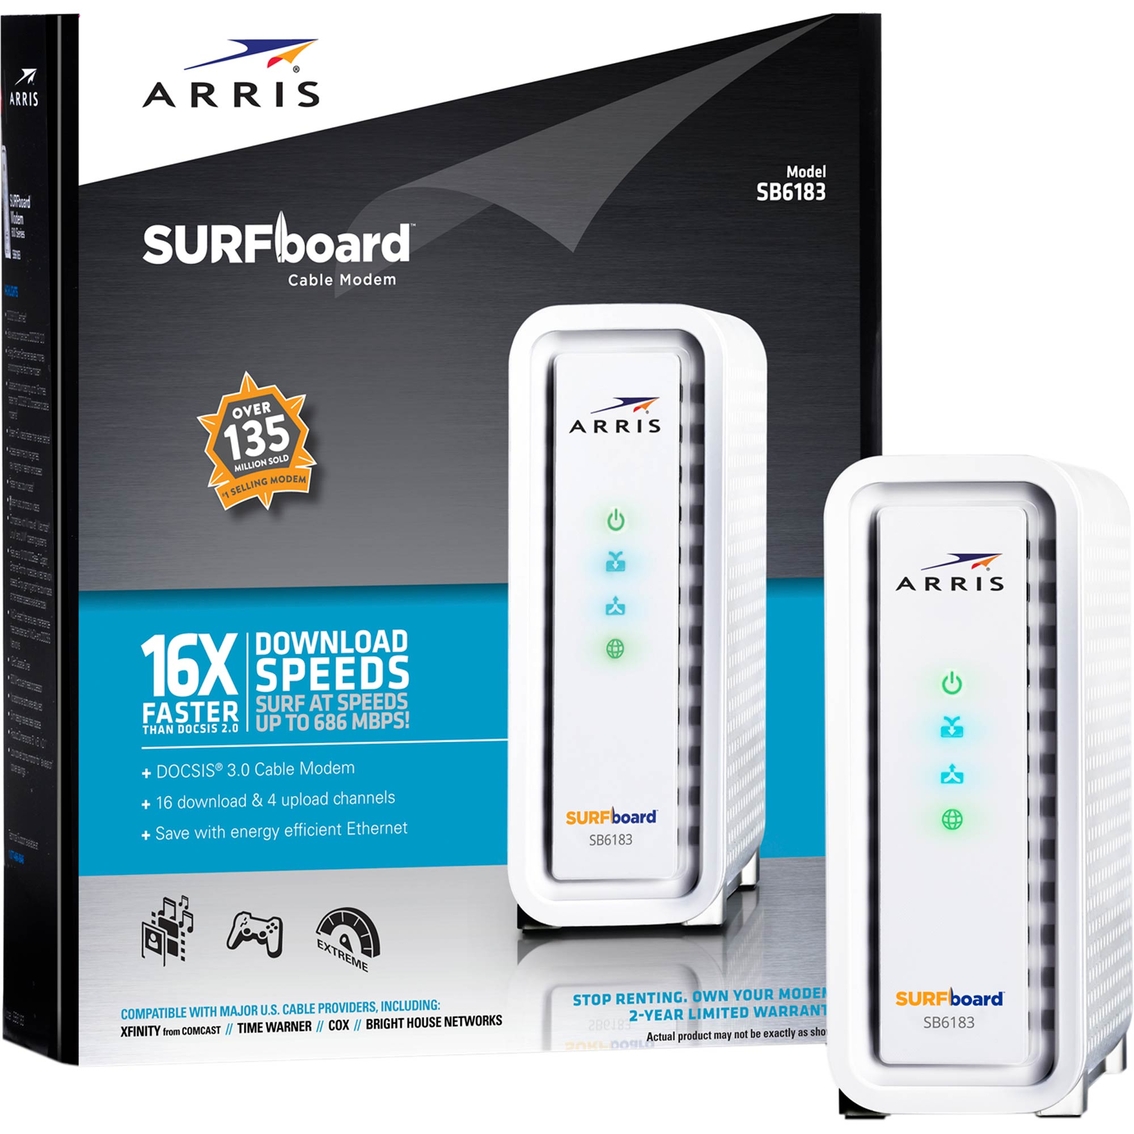 ARRIS SURFboard SB6183 Cable Modem, White - Image 4 of 4